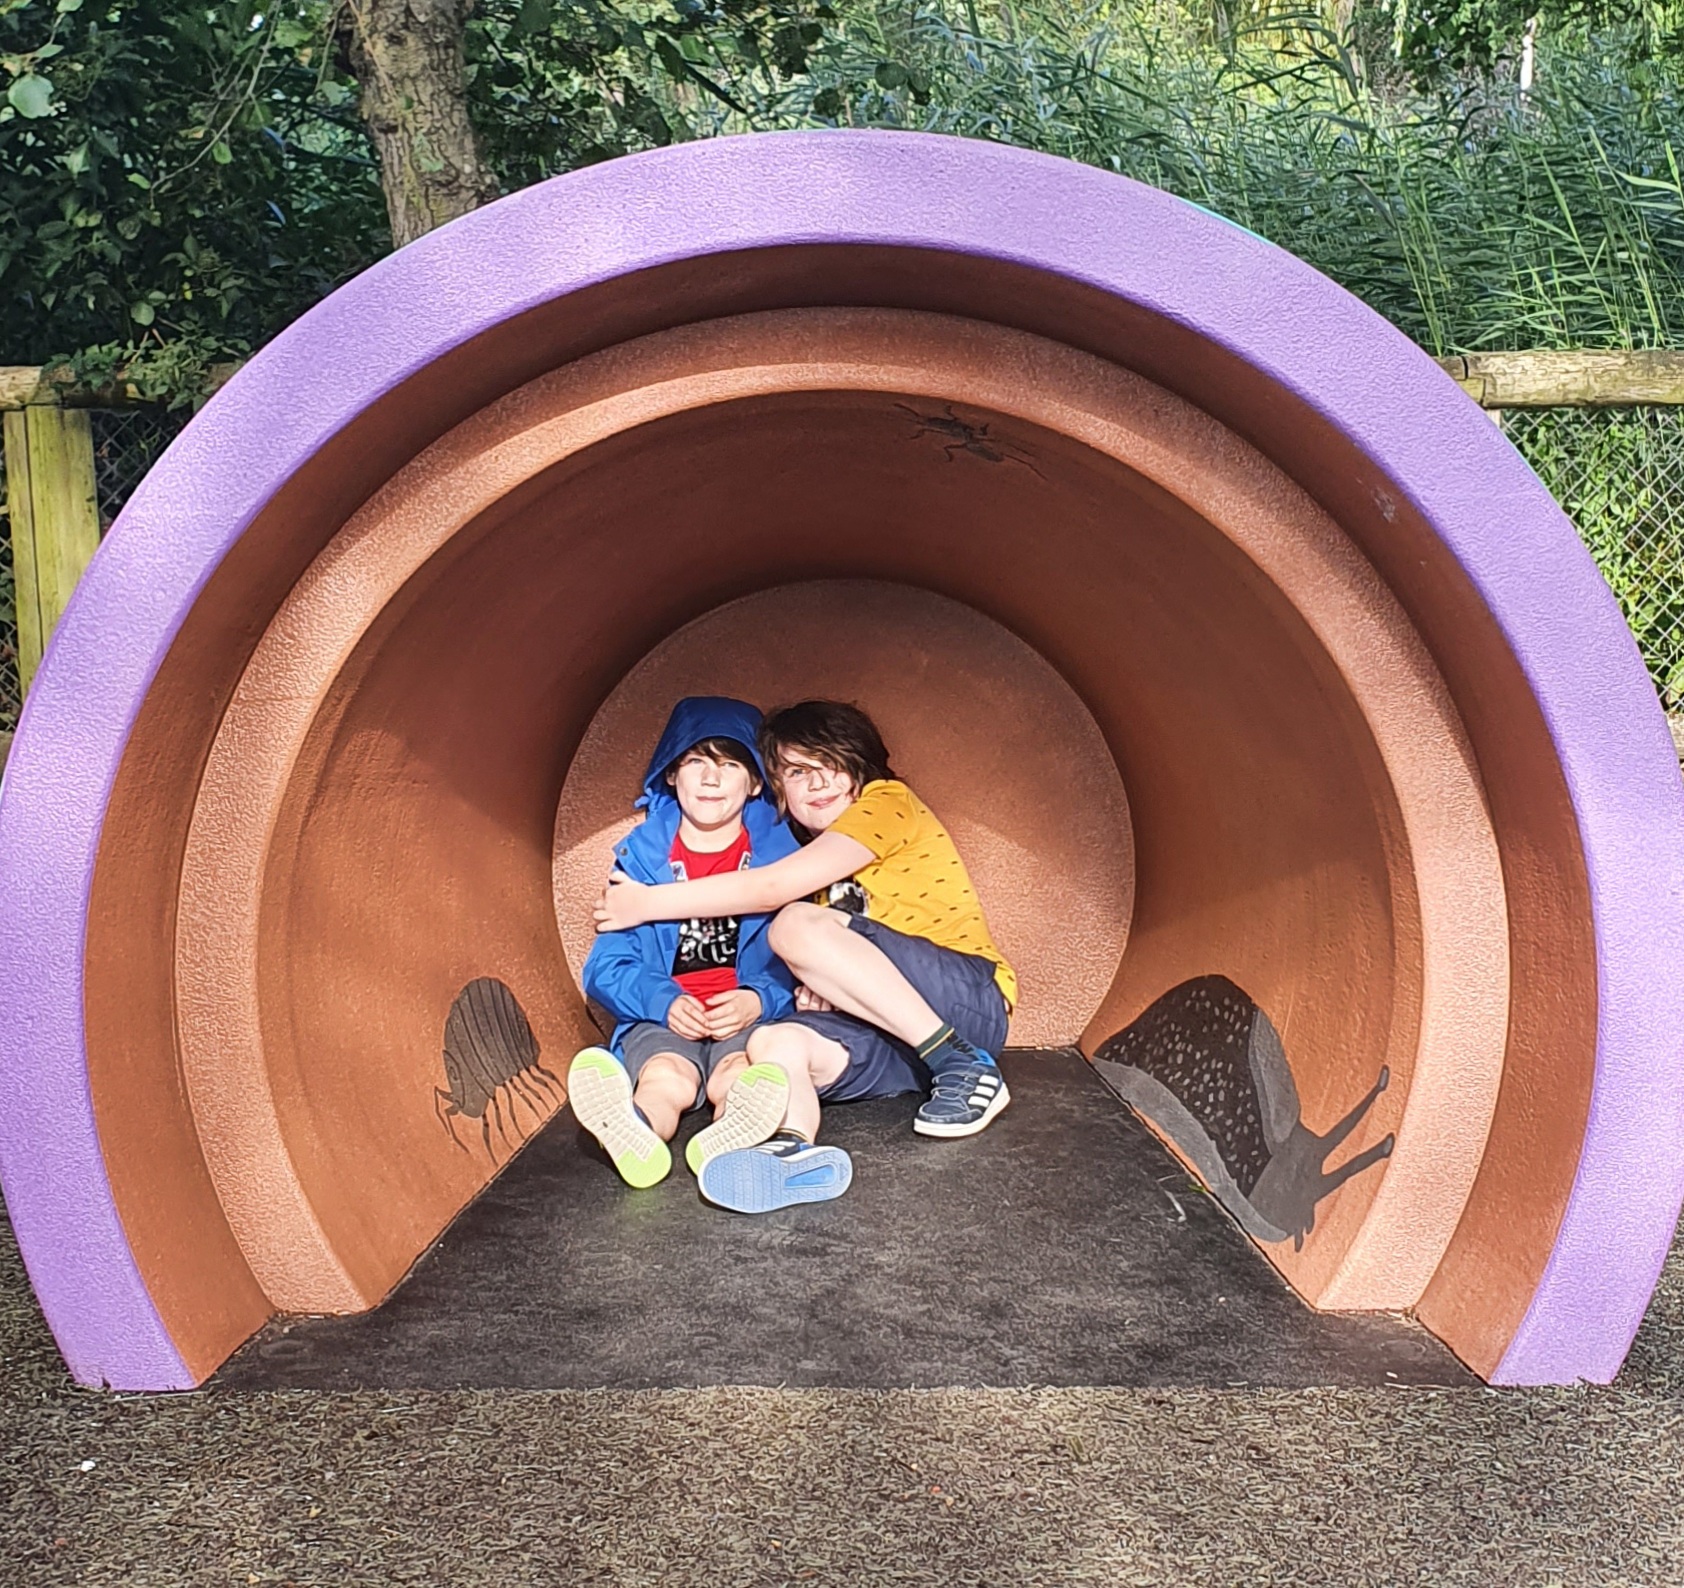 Two boys hugging in what looks like an upturned giant plant pot at Chester Zoo